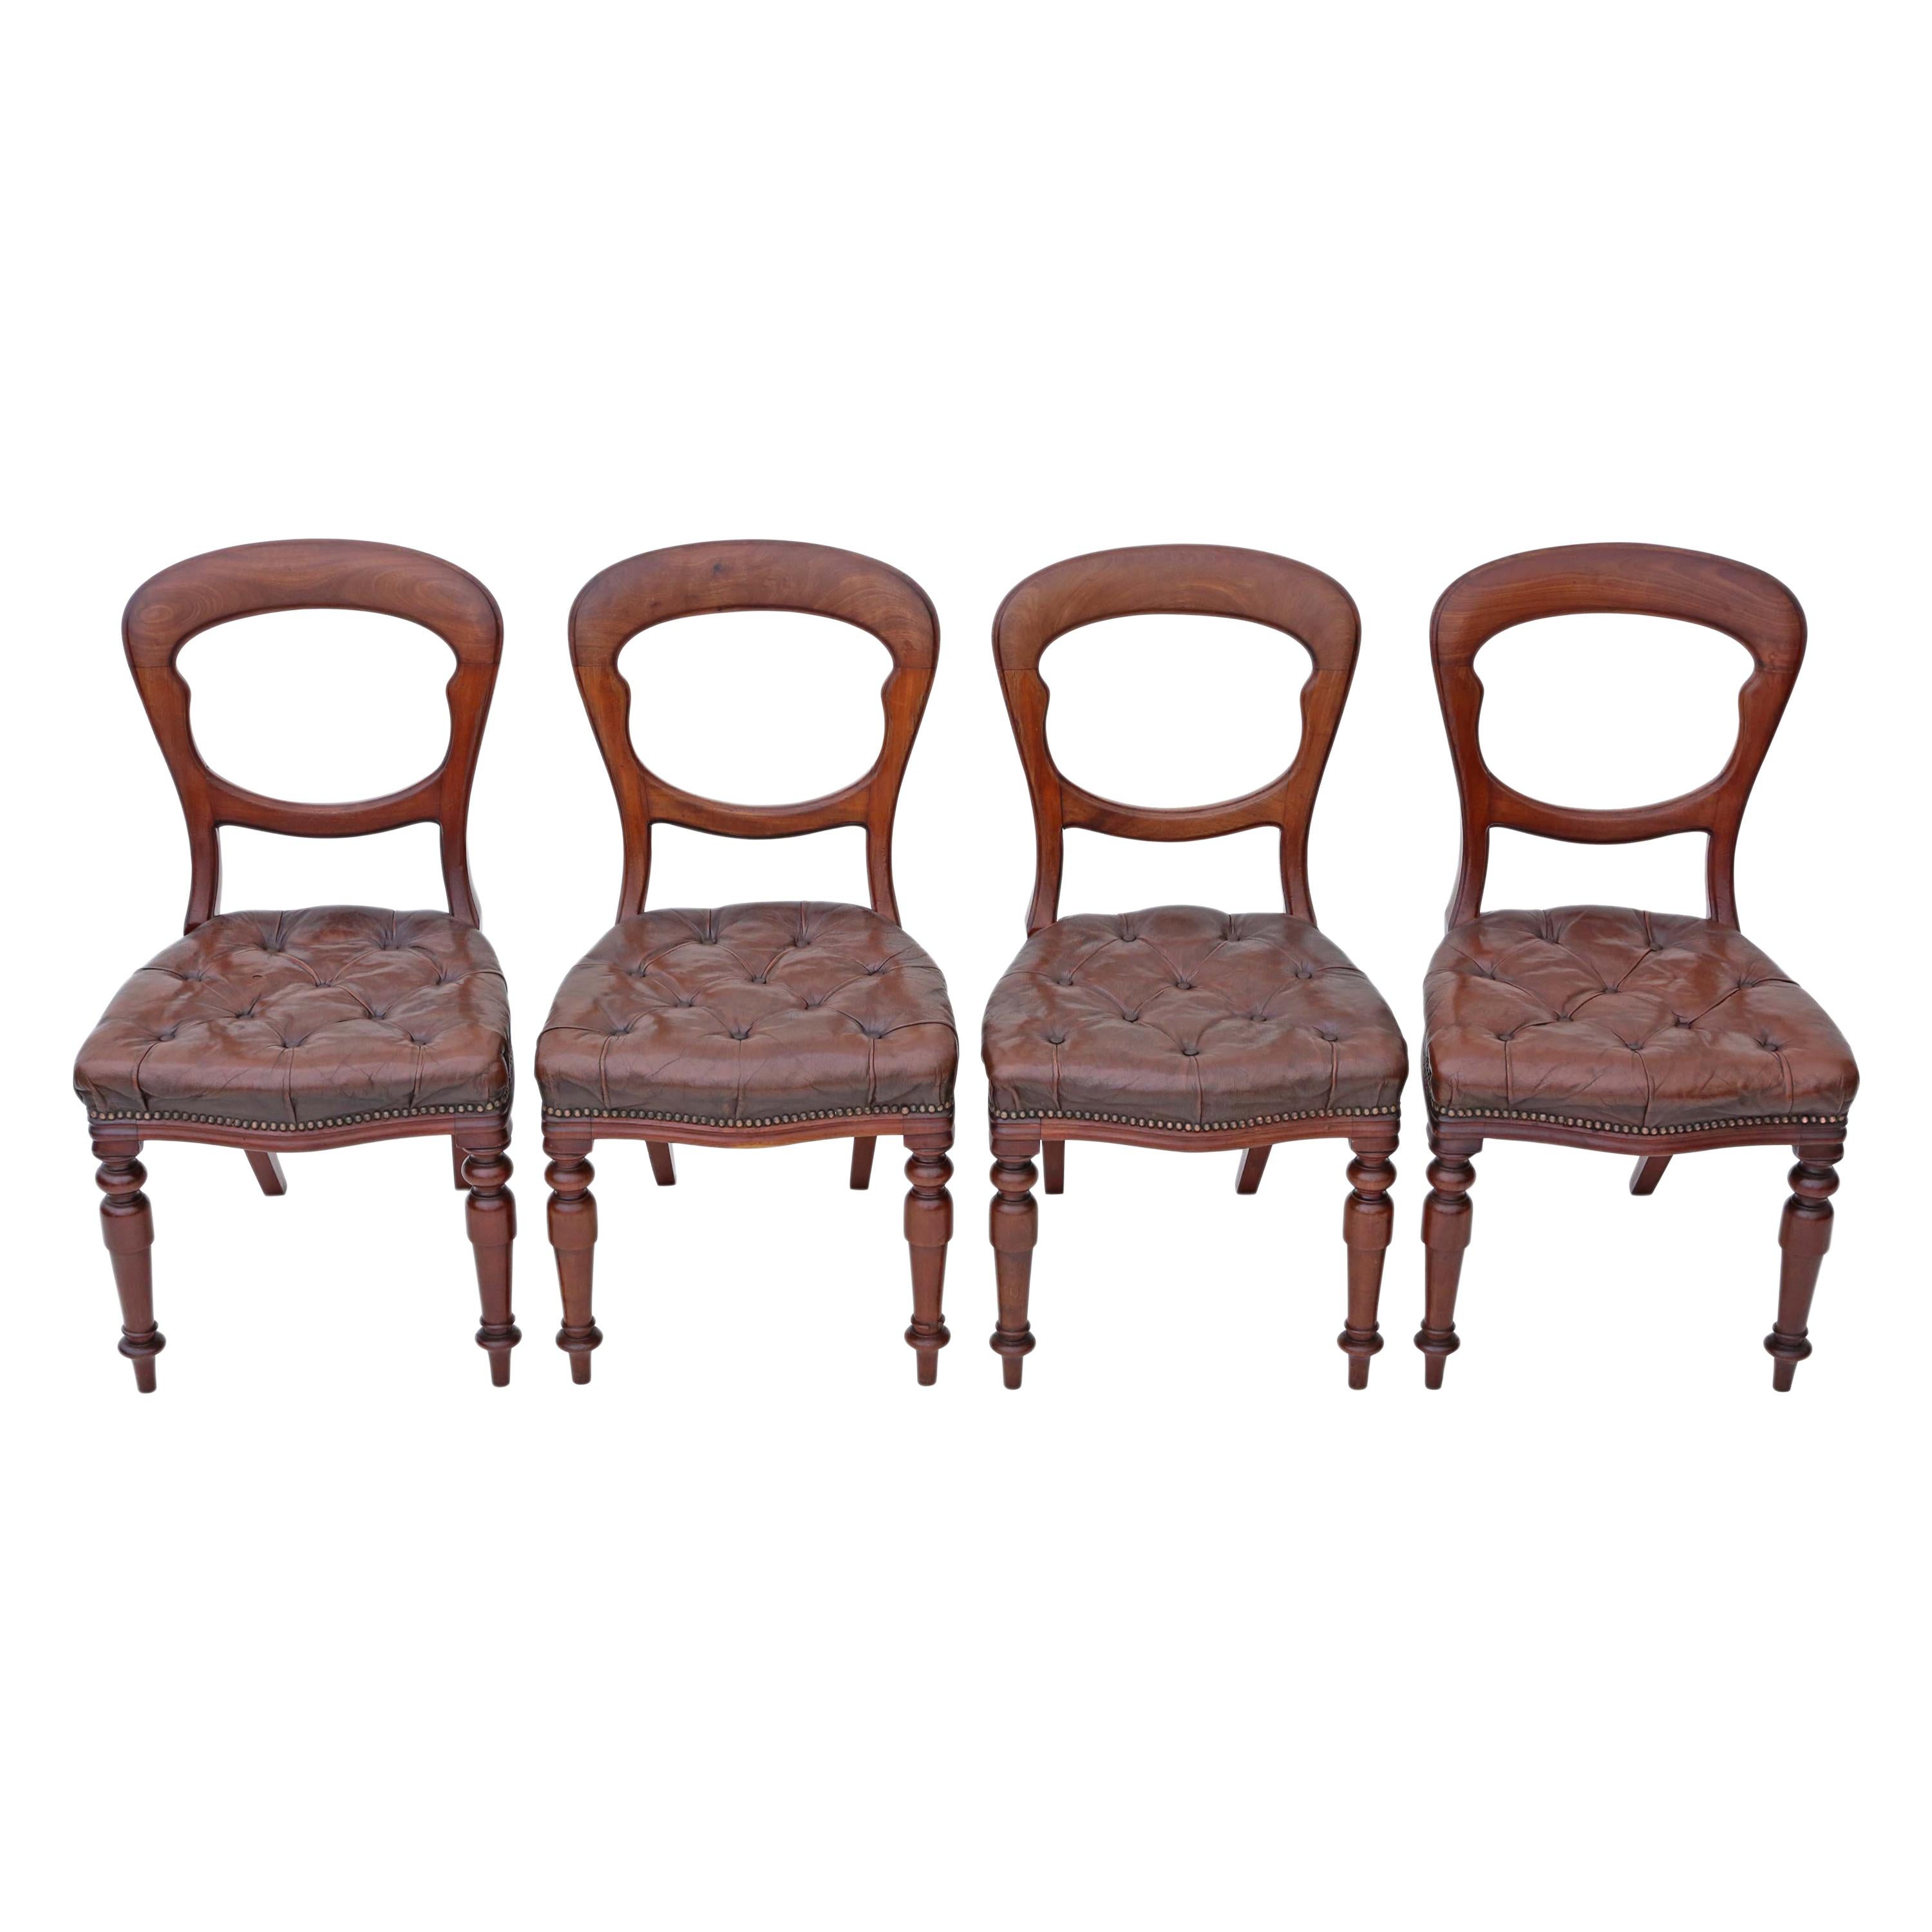 Set of 4 Victorian circa 1880 Mahogany Leather Balloon Back Dining Chairs